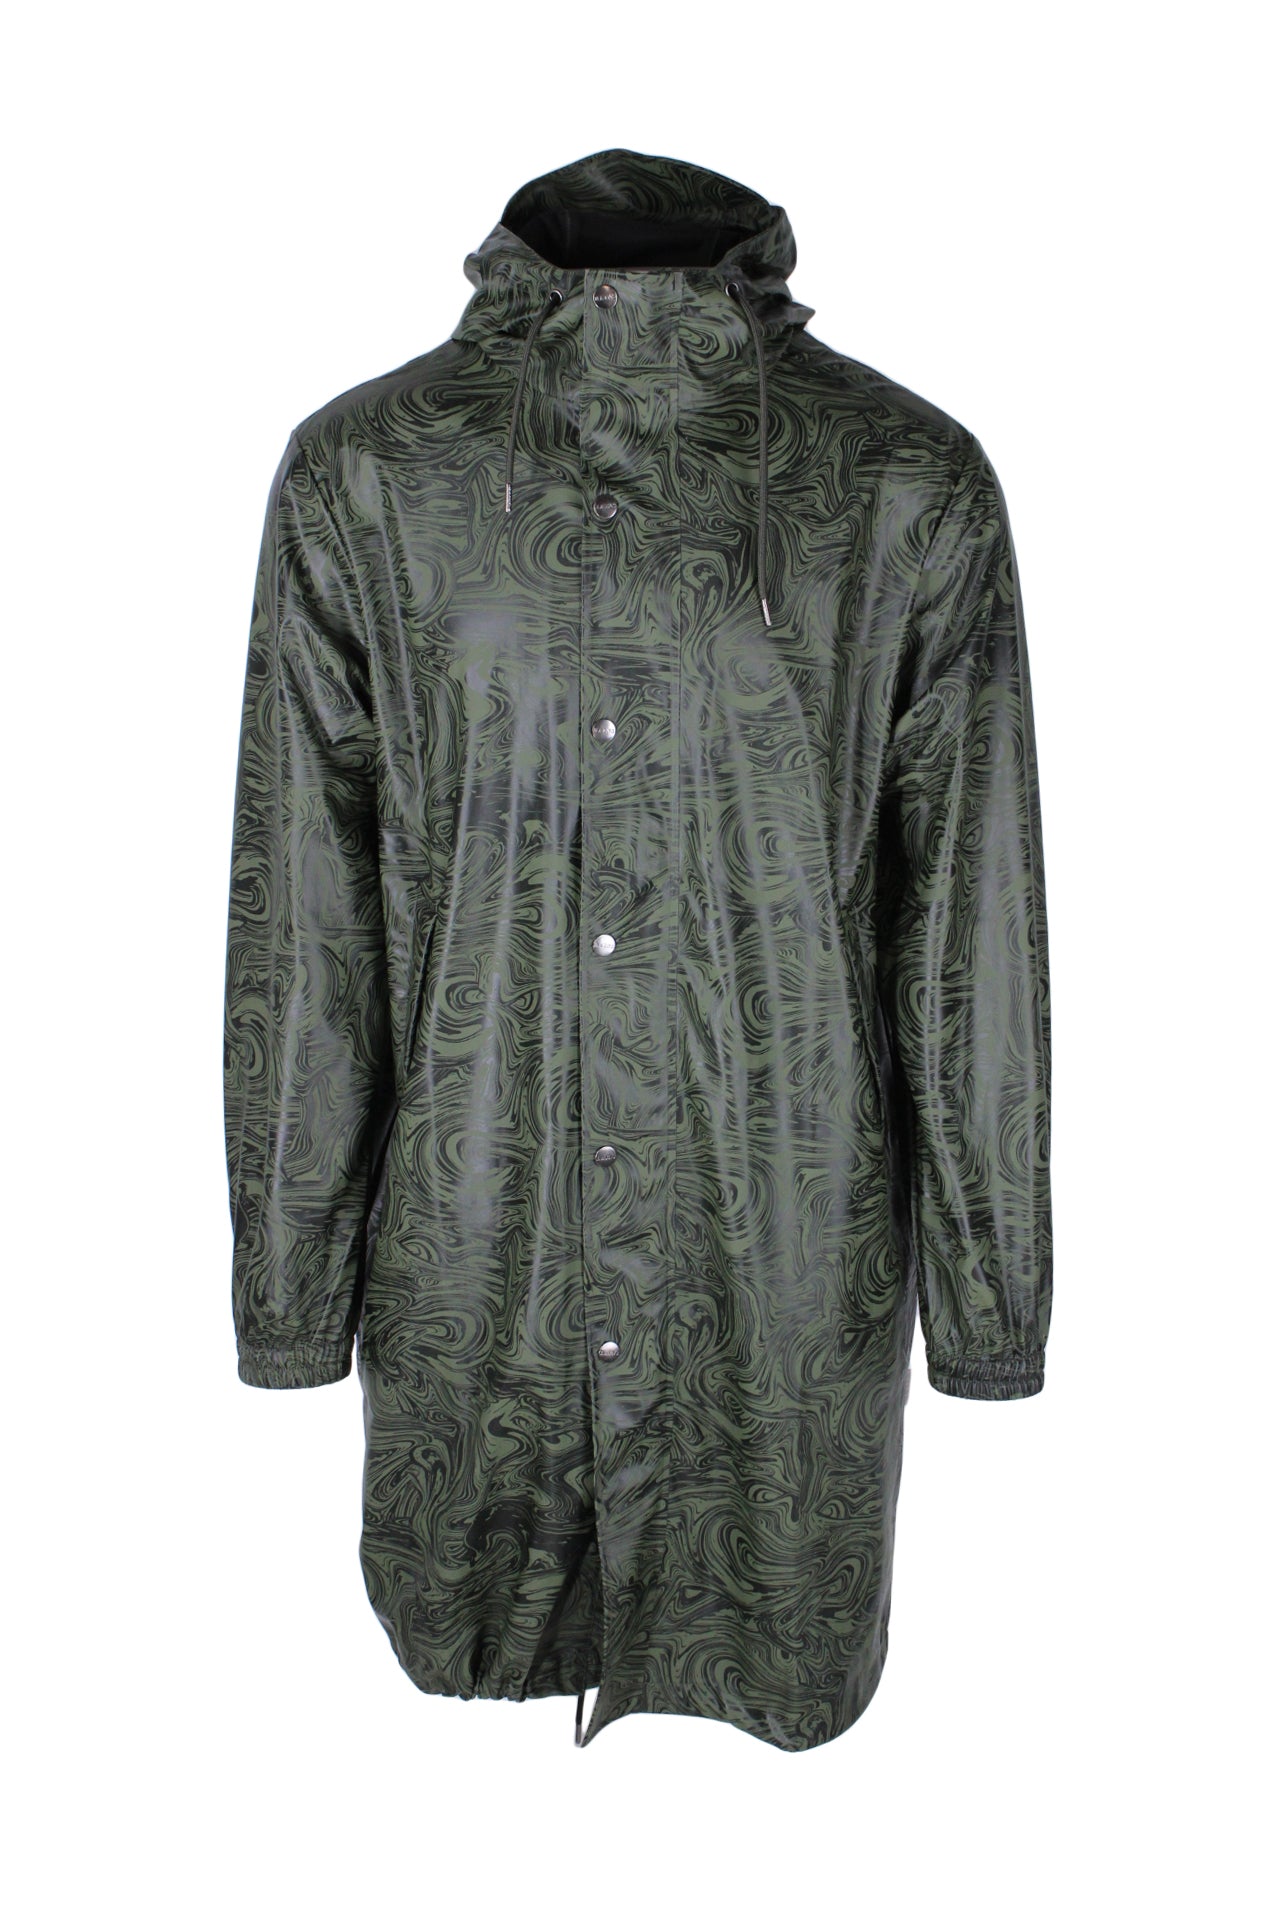 front angle of mid length rains marble print raincoat. features snap closure up center, hood with drawstring, long sleeves with elasticized cuffs, and drawstring hem. 